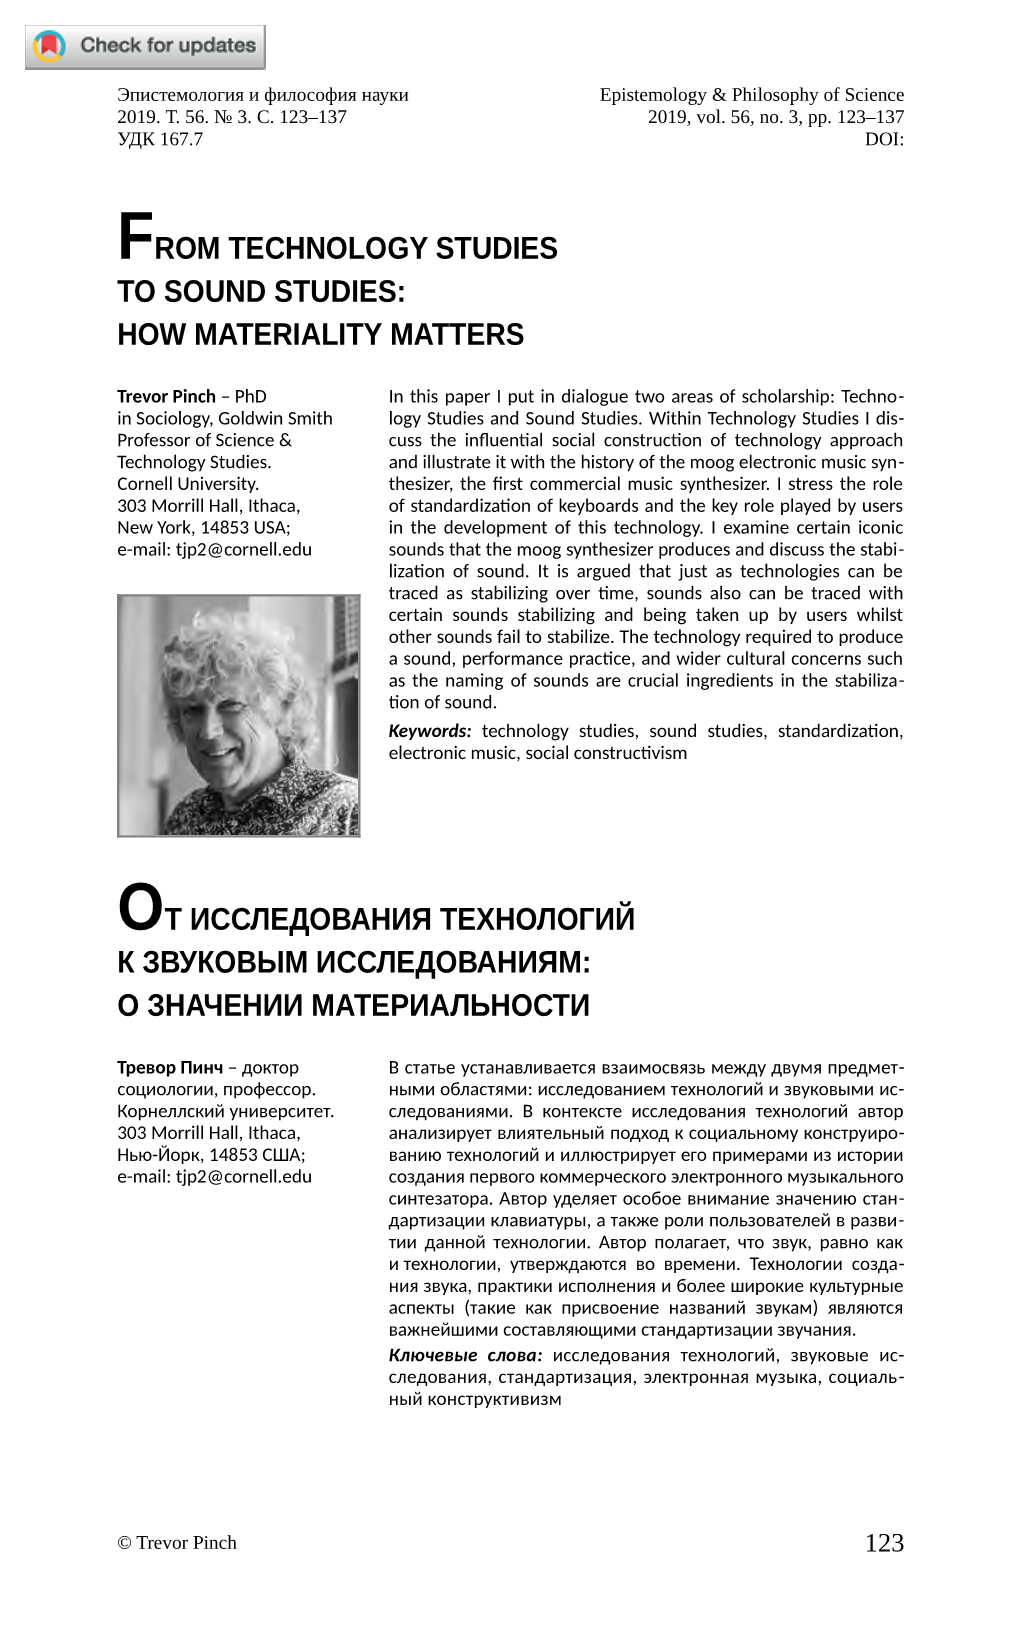 From Technology Studies to Sound Studies: How Materiality Matters